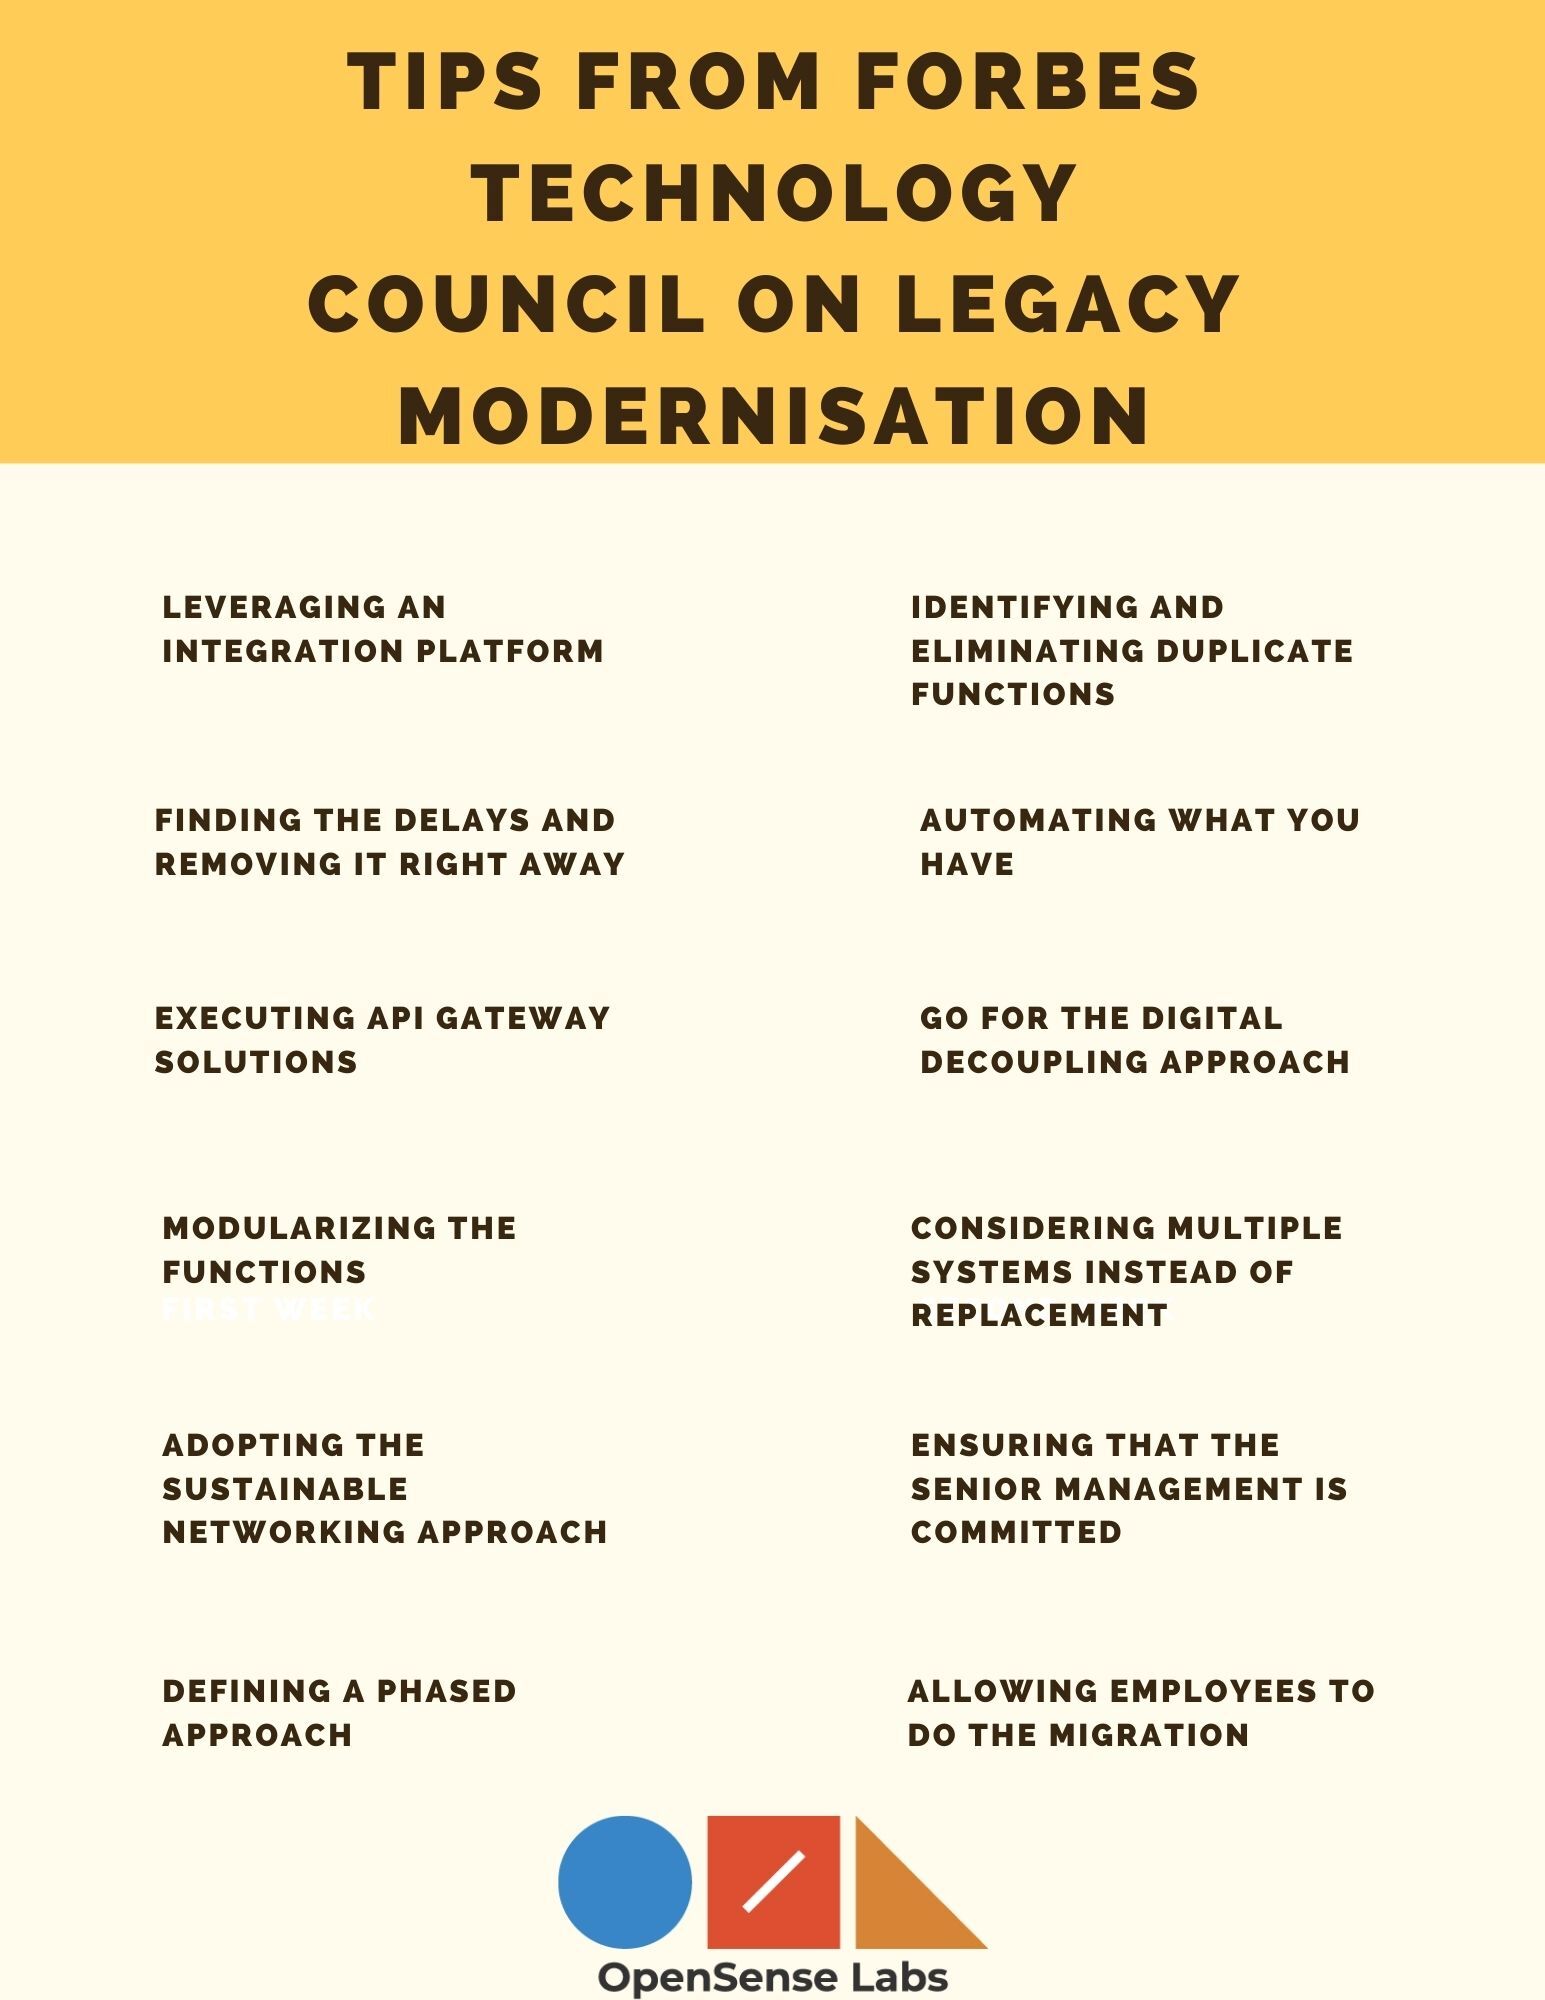 Illustration diagram describing tips from Forbes Technology Council on legacy modernization